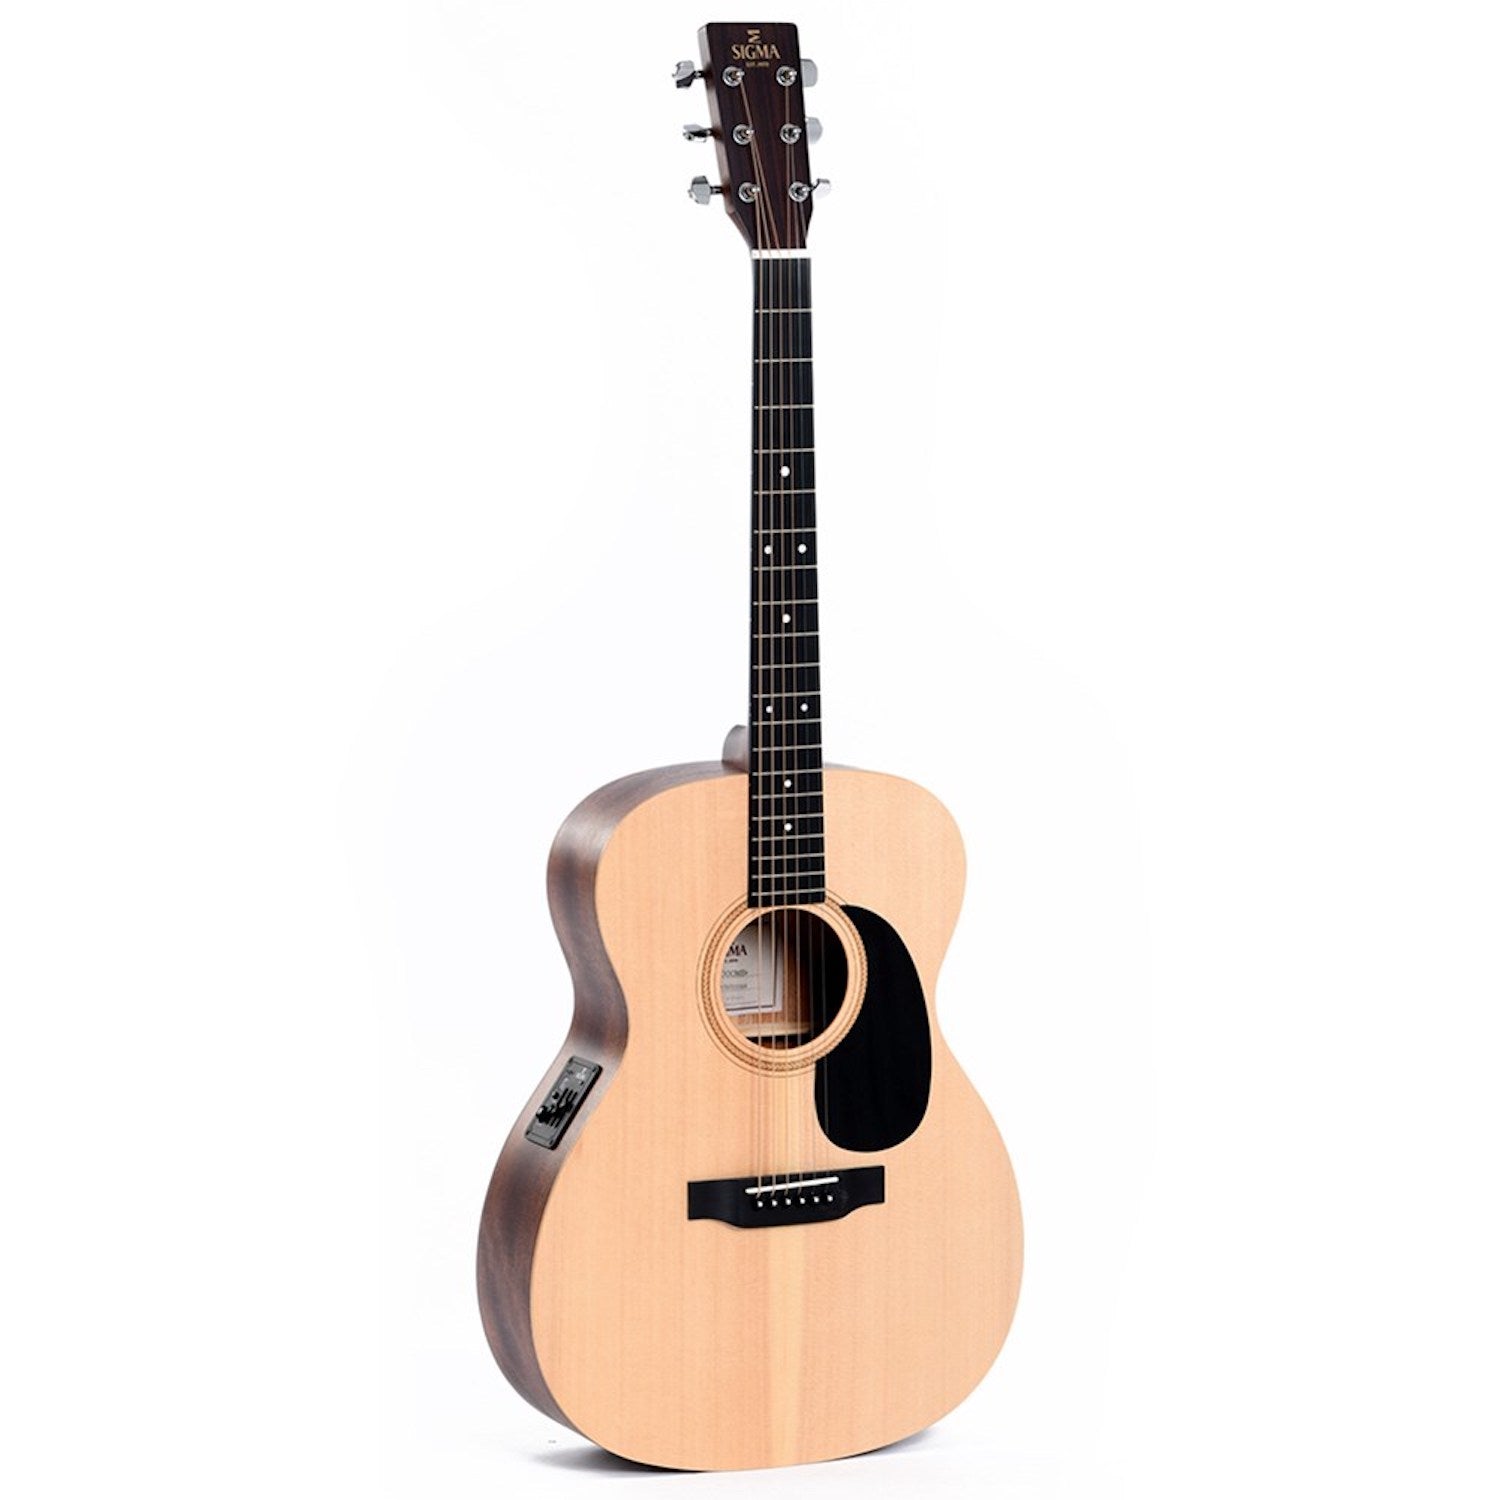 Sigma 000ME SE Series 000 Spruce/Mahogany Acoustic/Electric Guitar